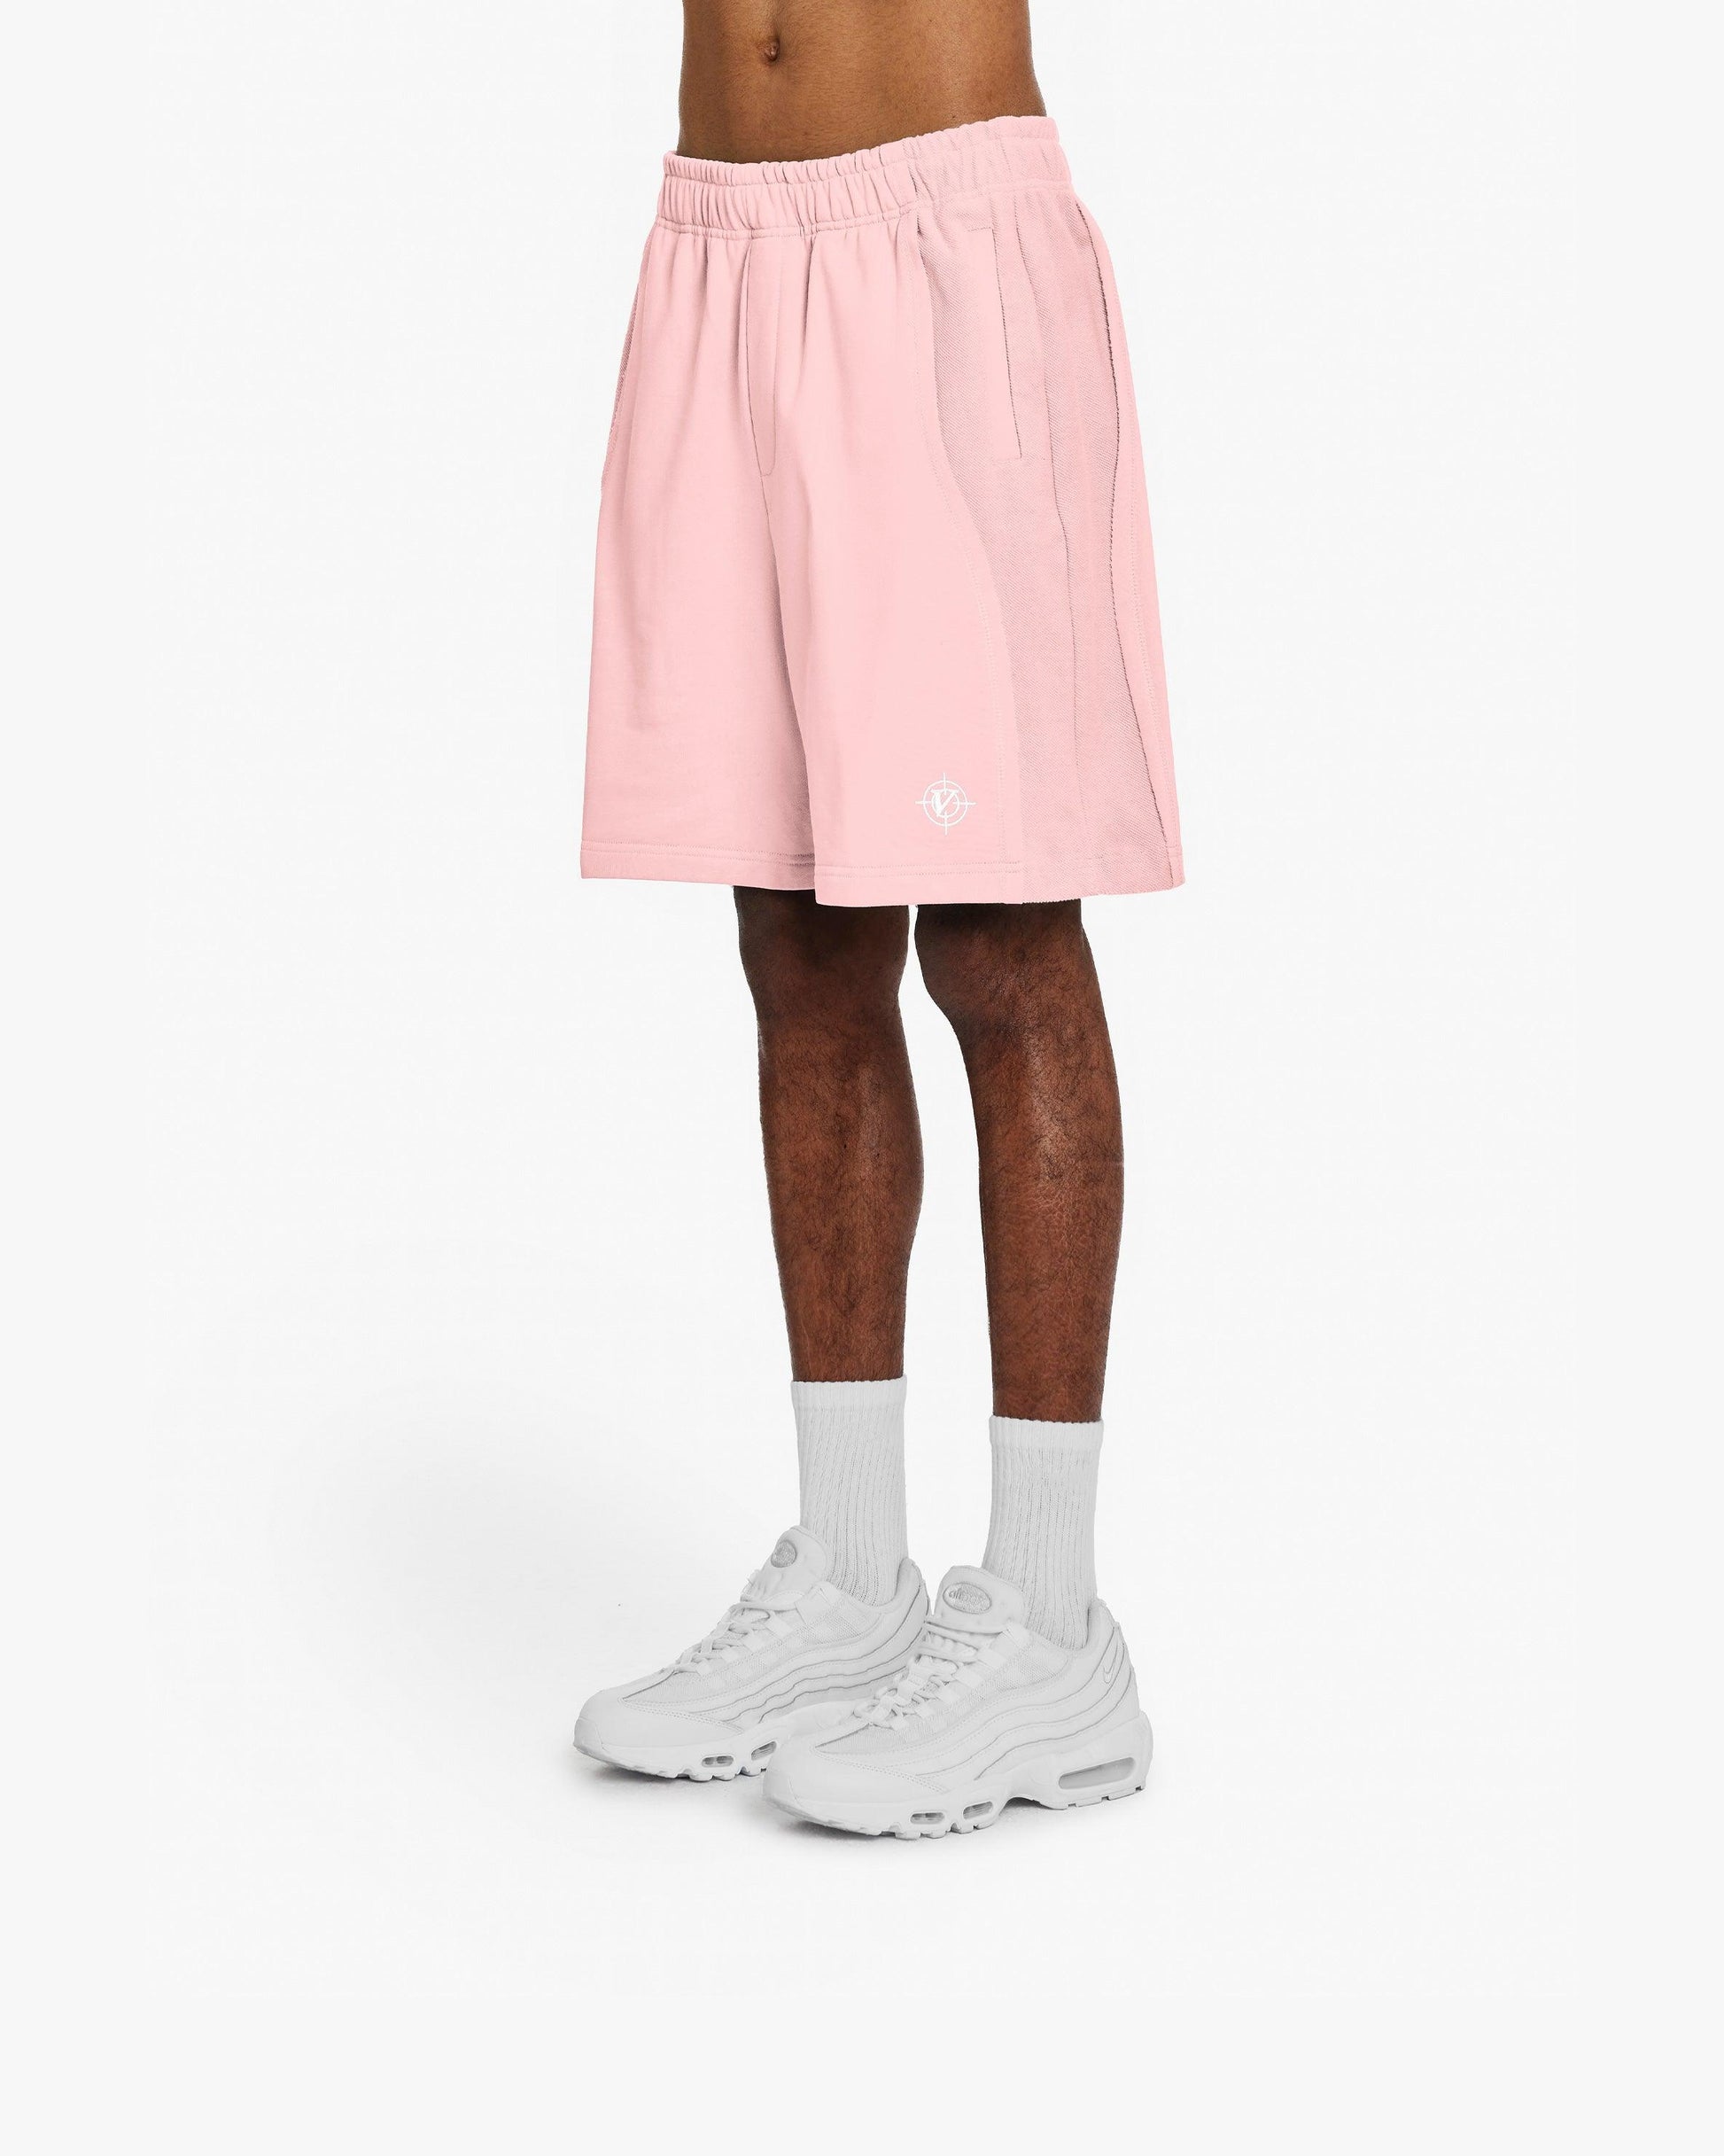 INSIDE OUT SHORTS PINK - VICINITY